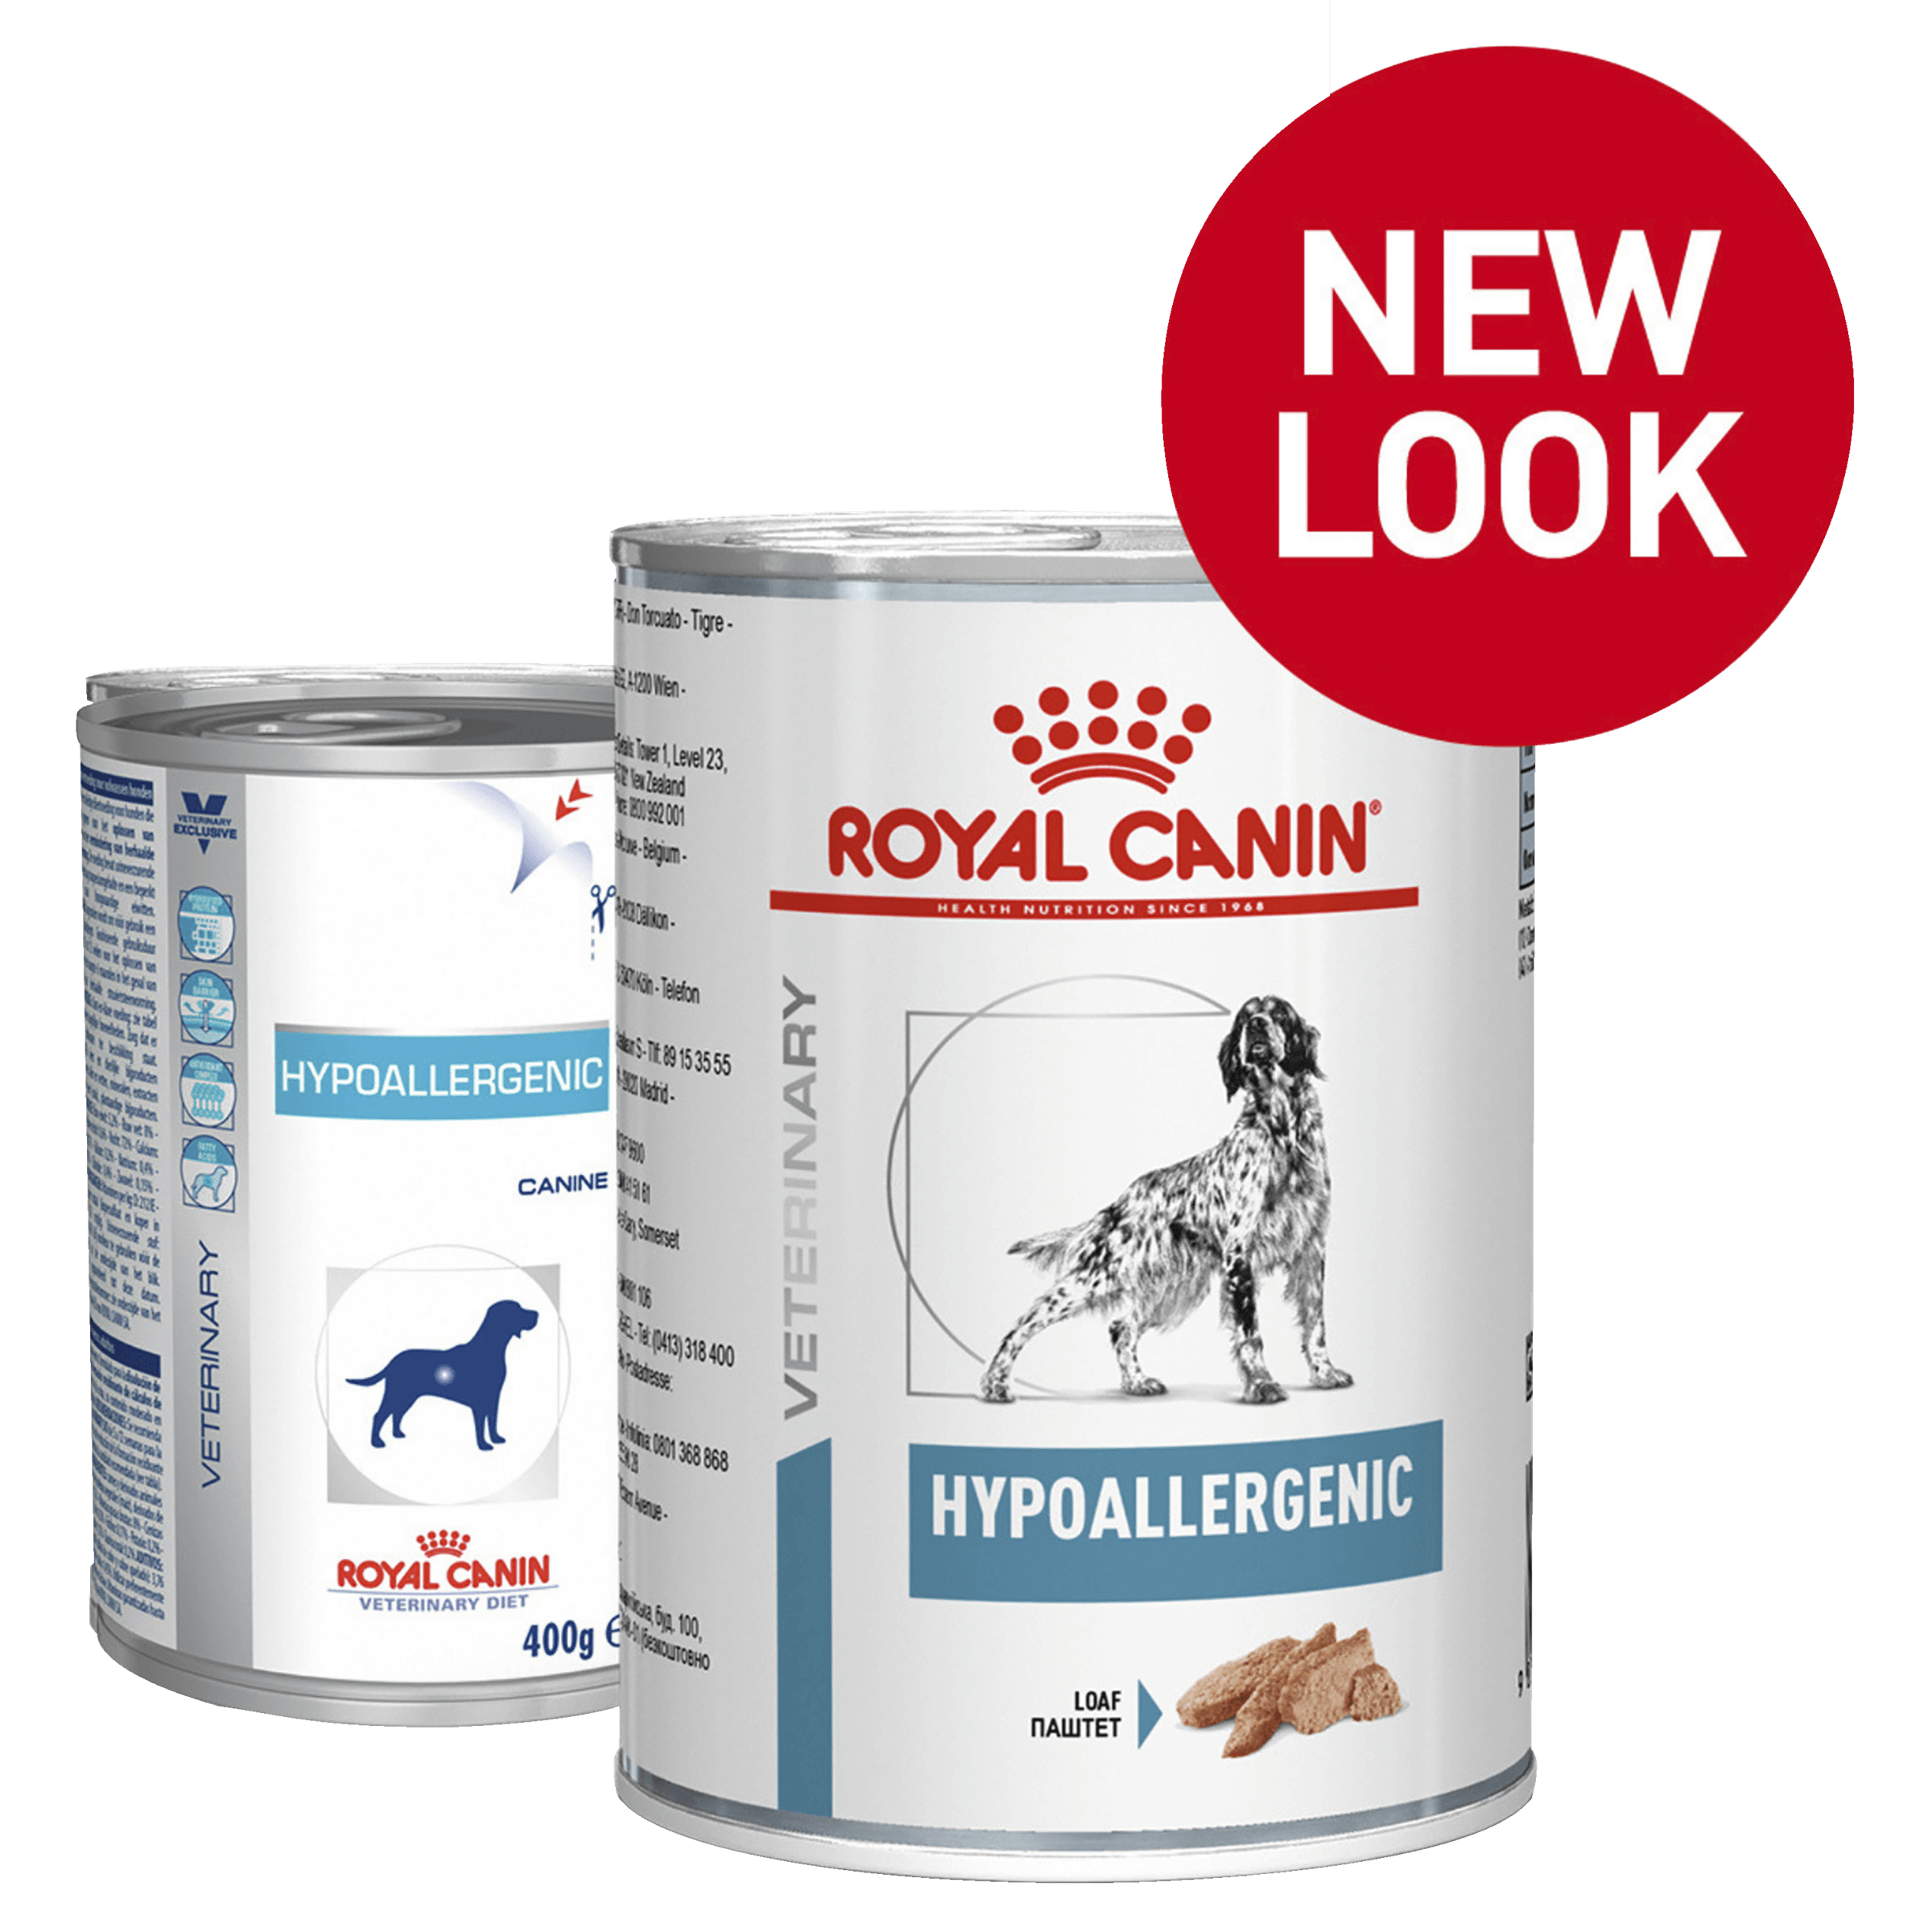 Buy Royal Canin Veterinary Hypoallergenic Wet Dog Food Cans Online ...